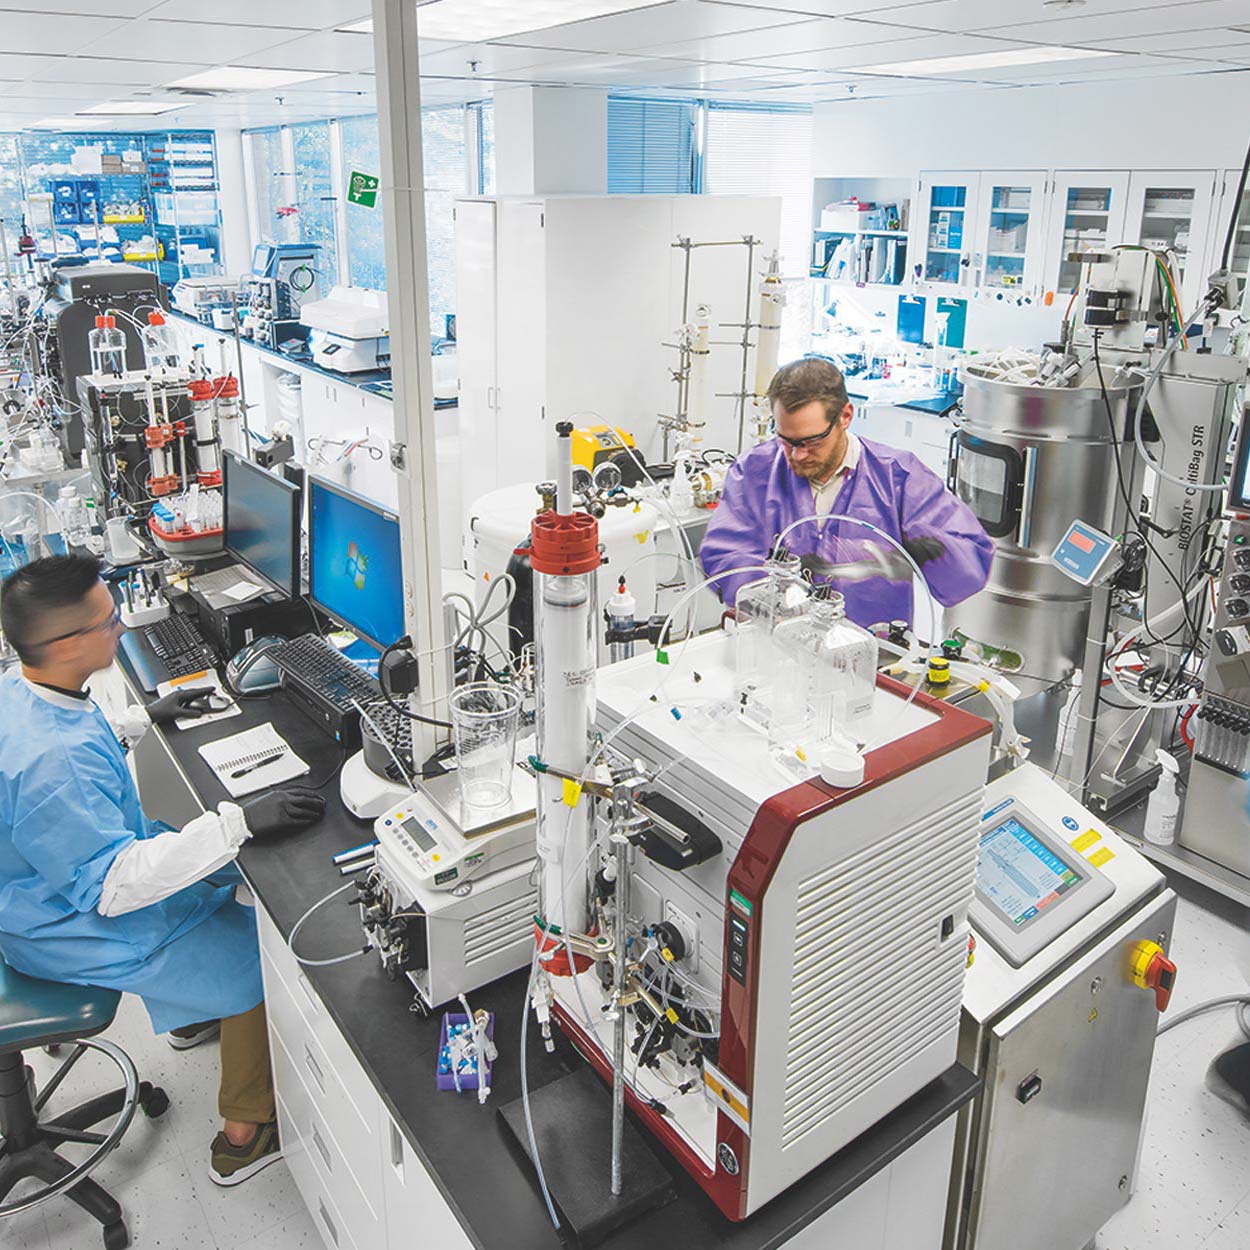 Two people wearing lab attire working in front of bioreactors.